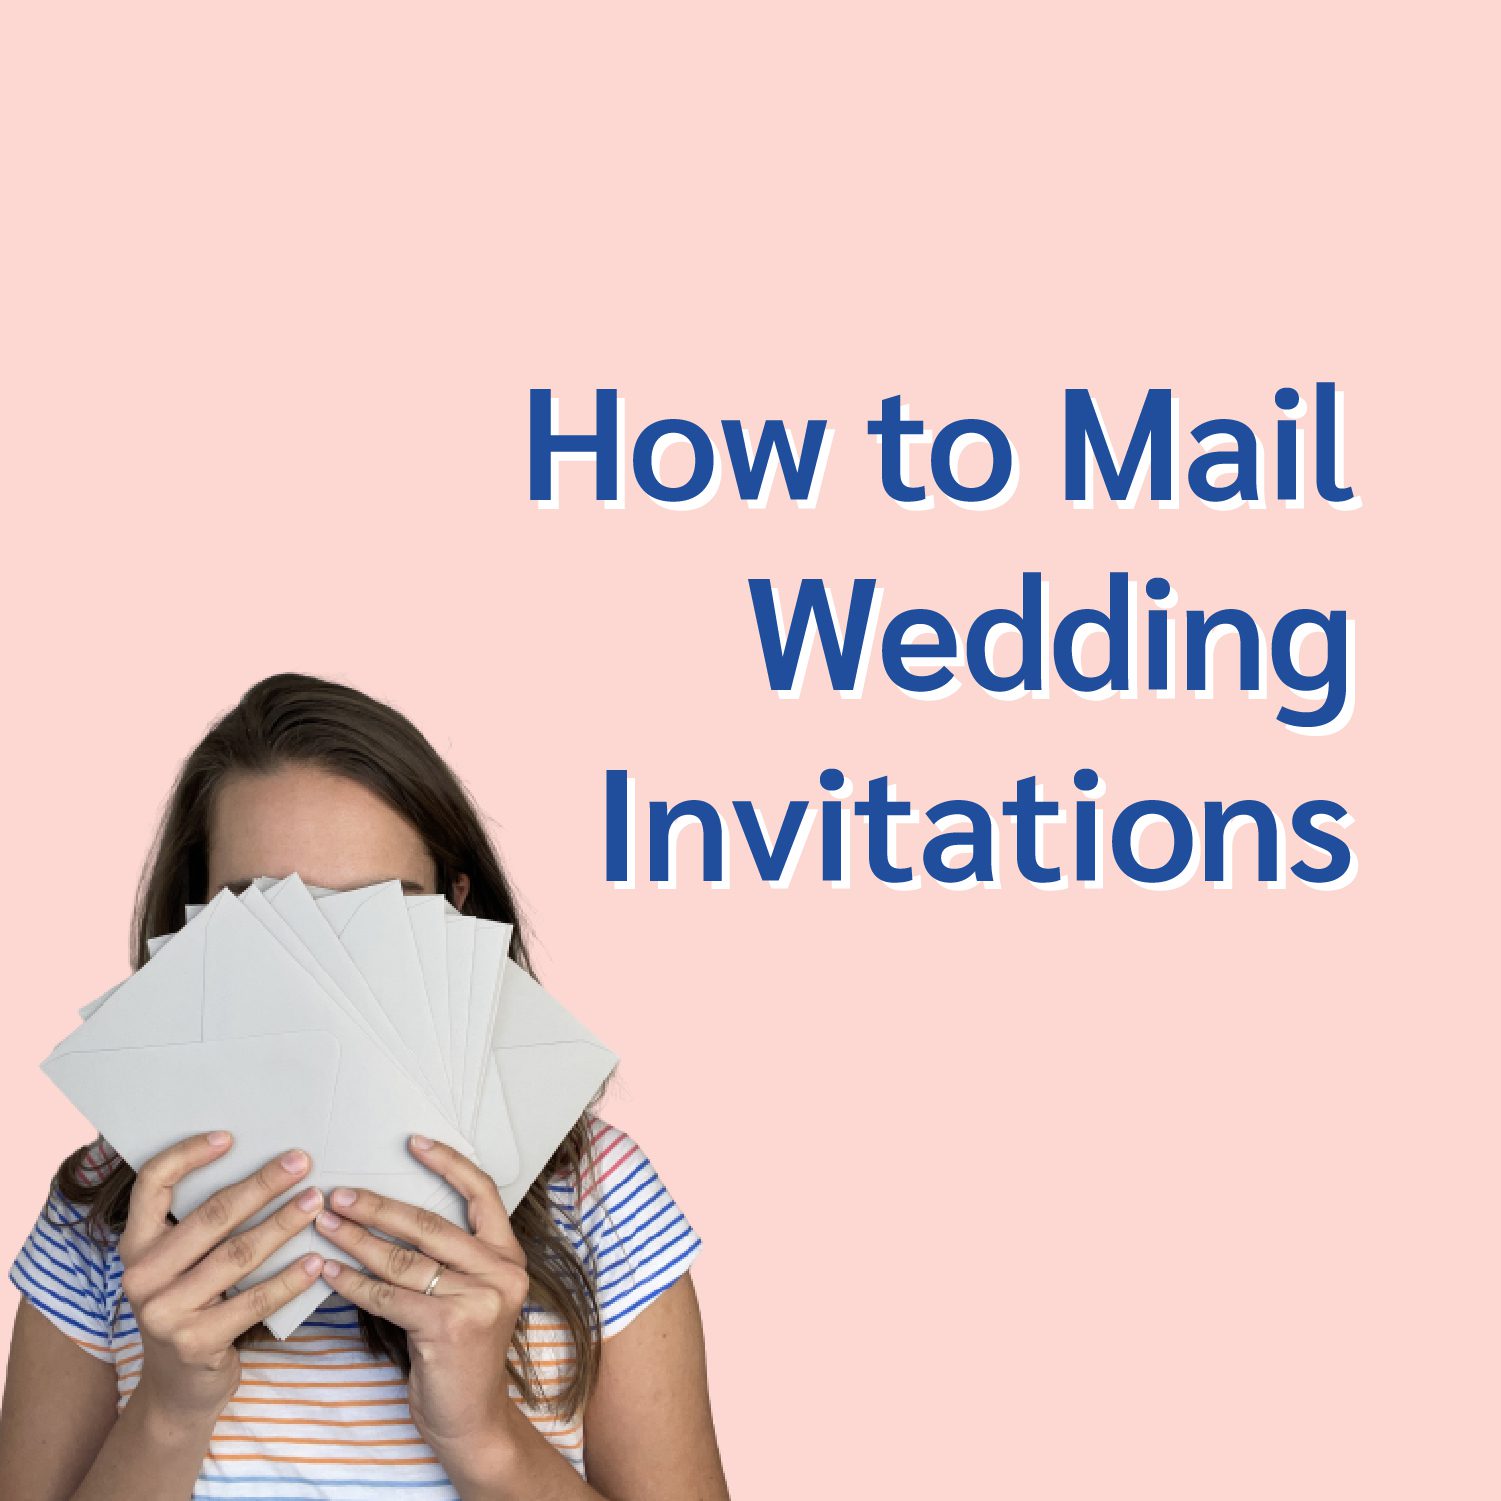 How to Mail Wedding Invitations